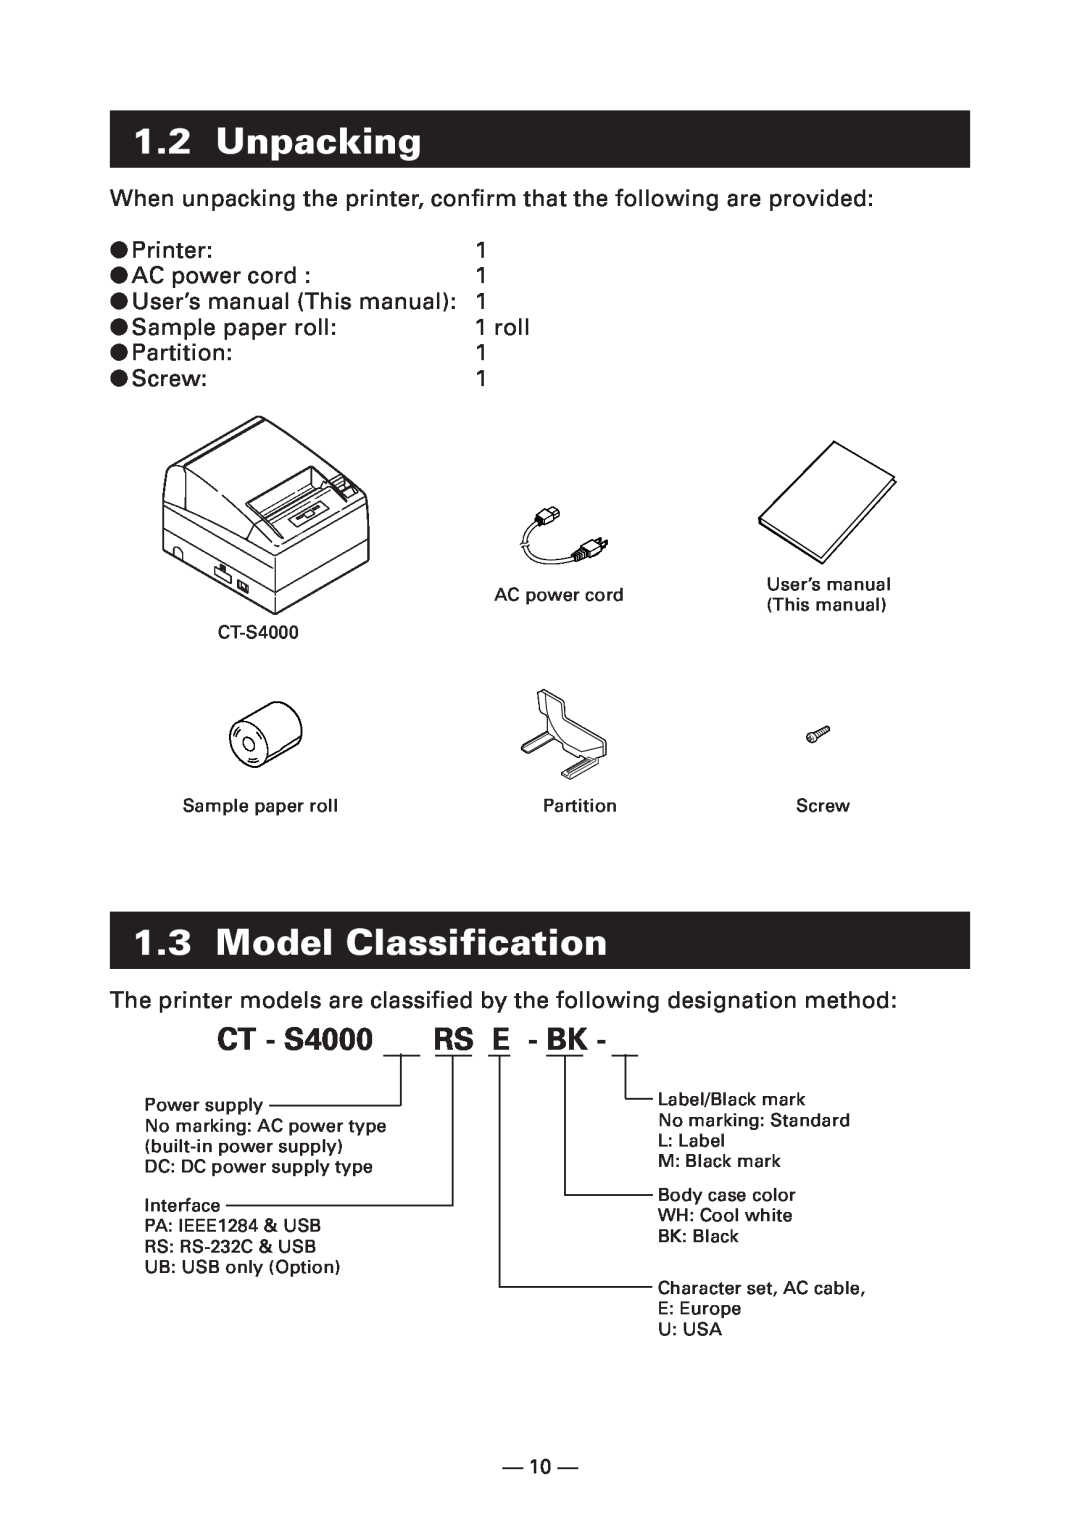 Citizen Systems CT-S4000DC user manual Unpacking, Model Classification, CT - S4000 RS E - BK 